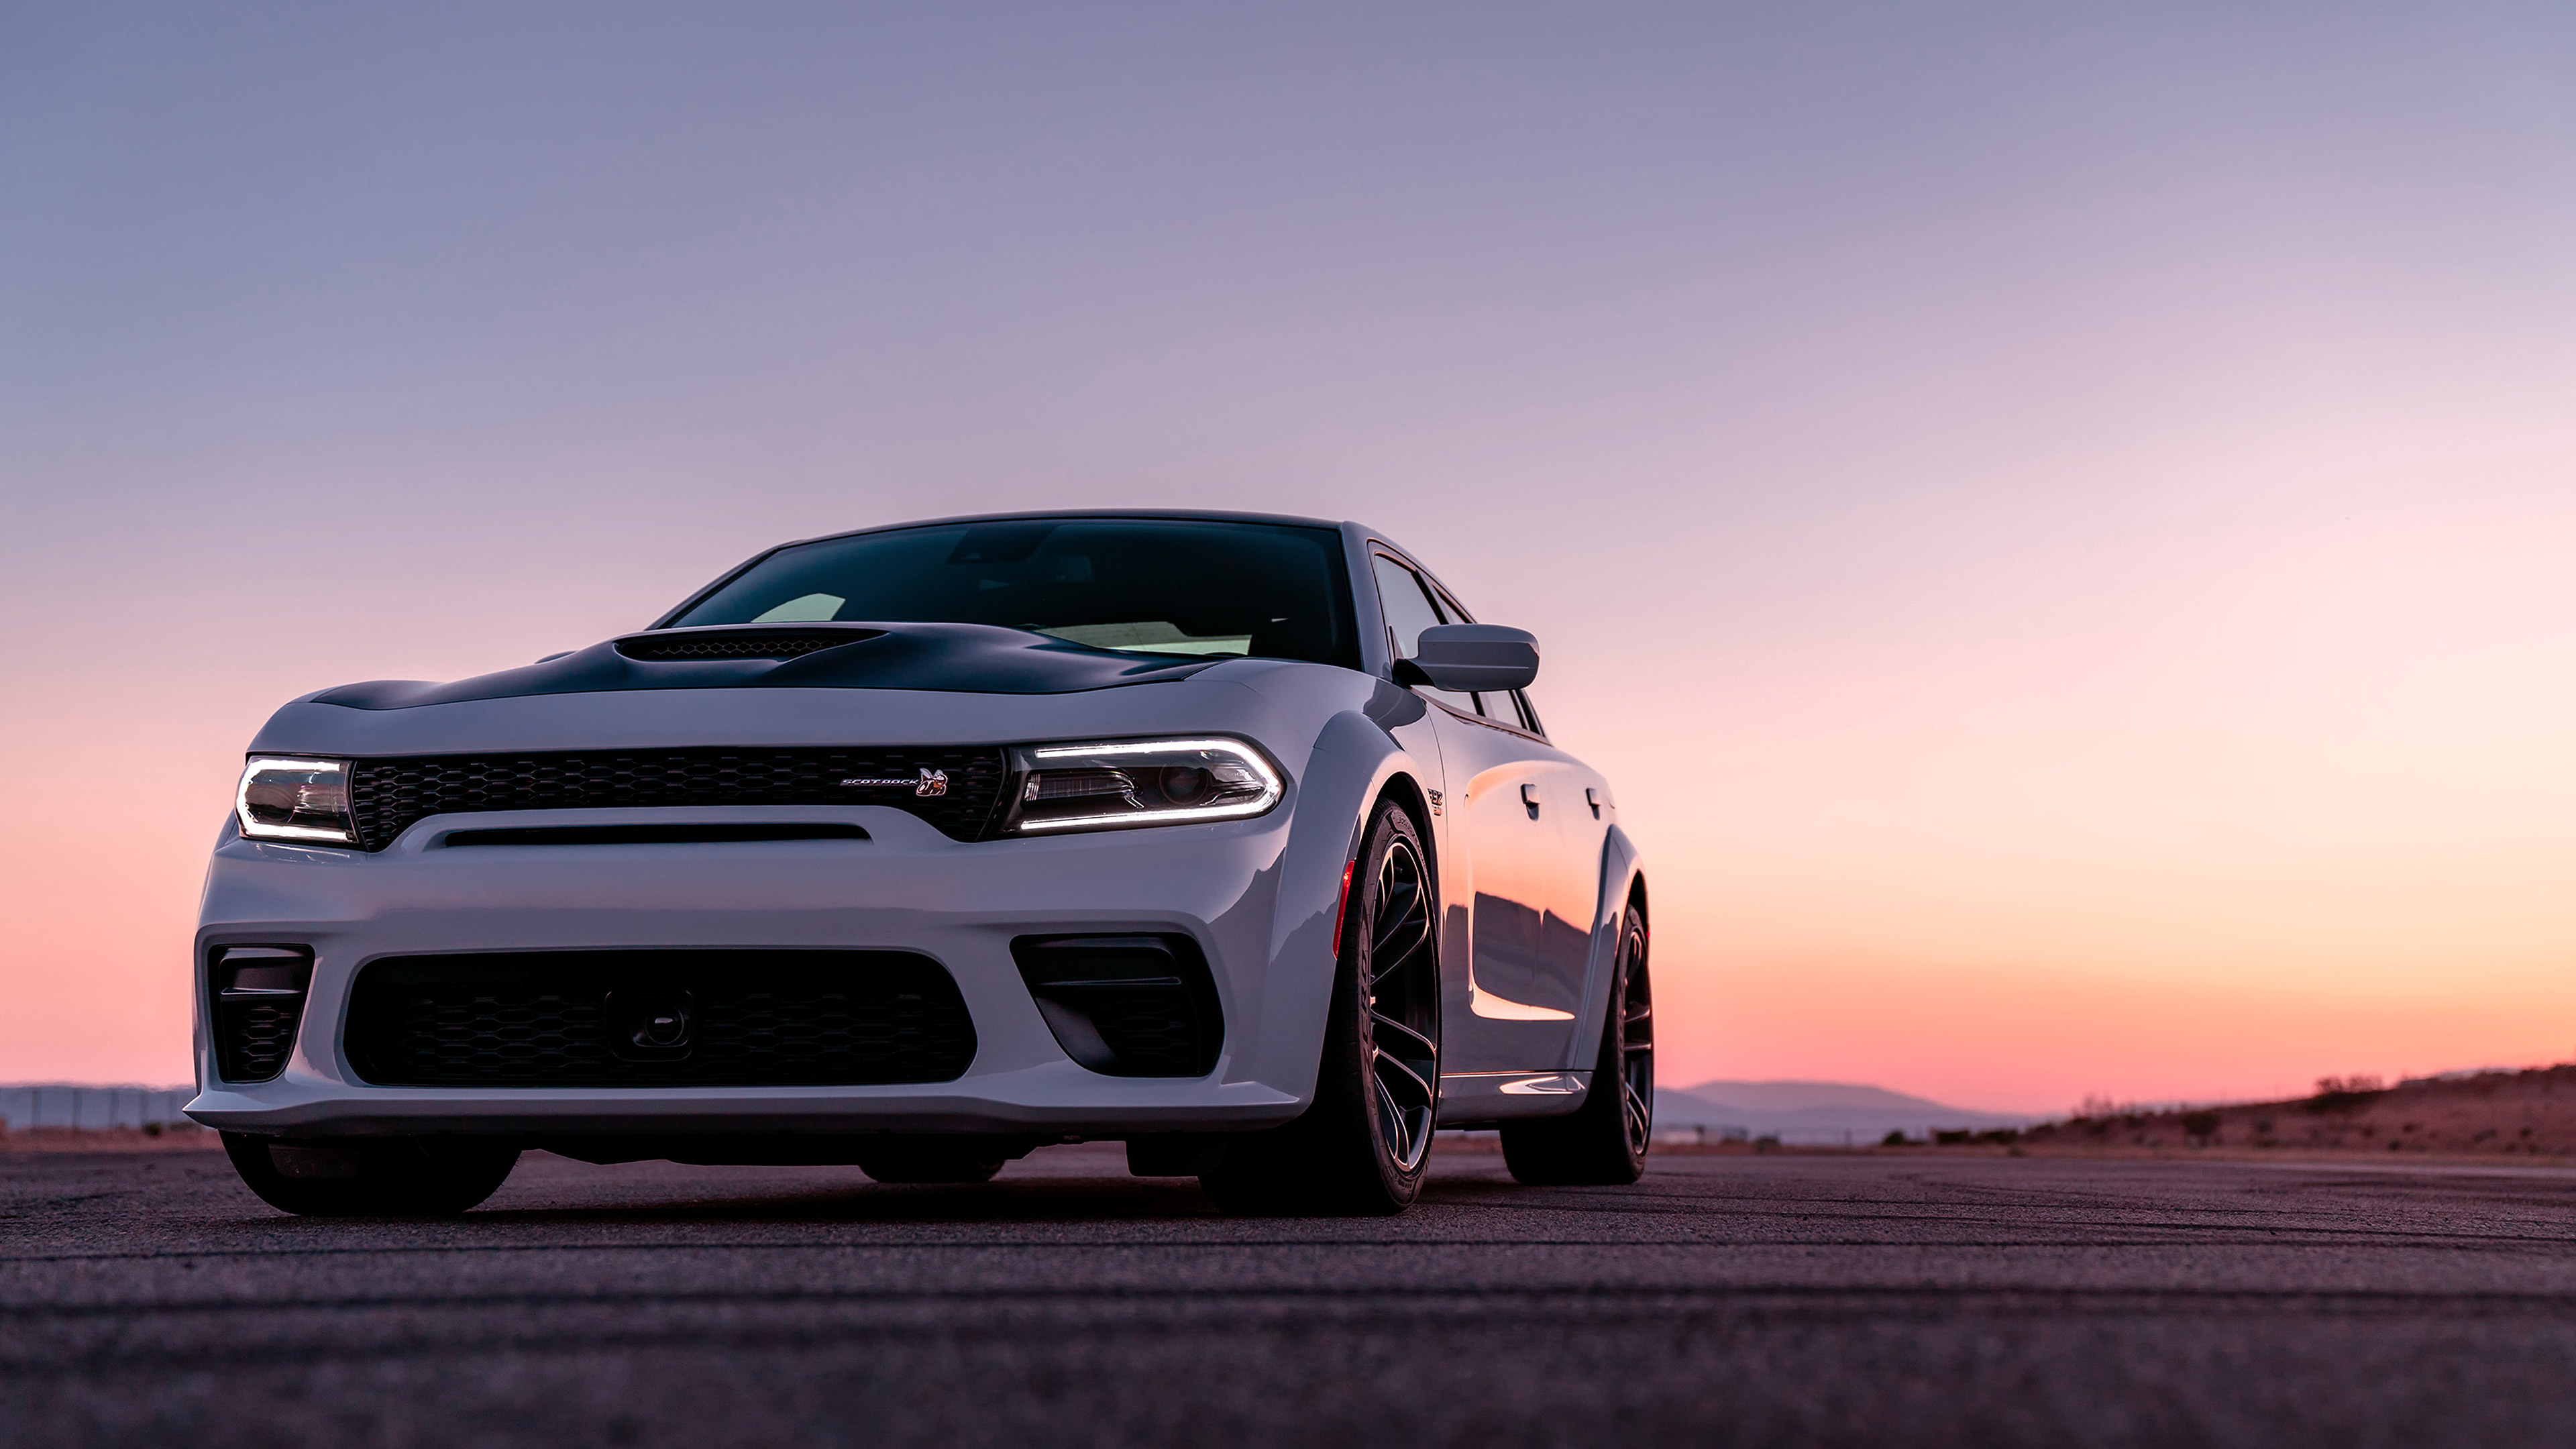 Dodge Charger, Scat pack widebody, Iconic muscle car, Unforgettable experience, 3840x2160 4K Desktop